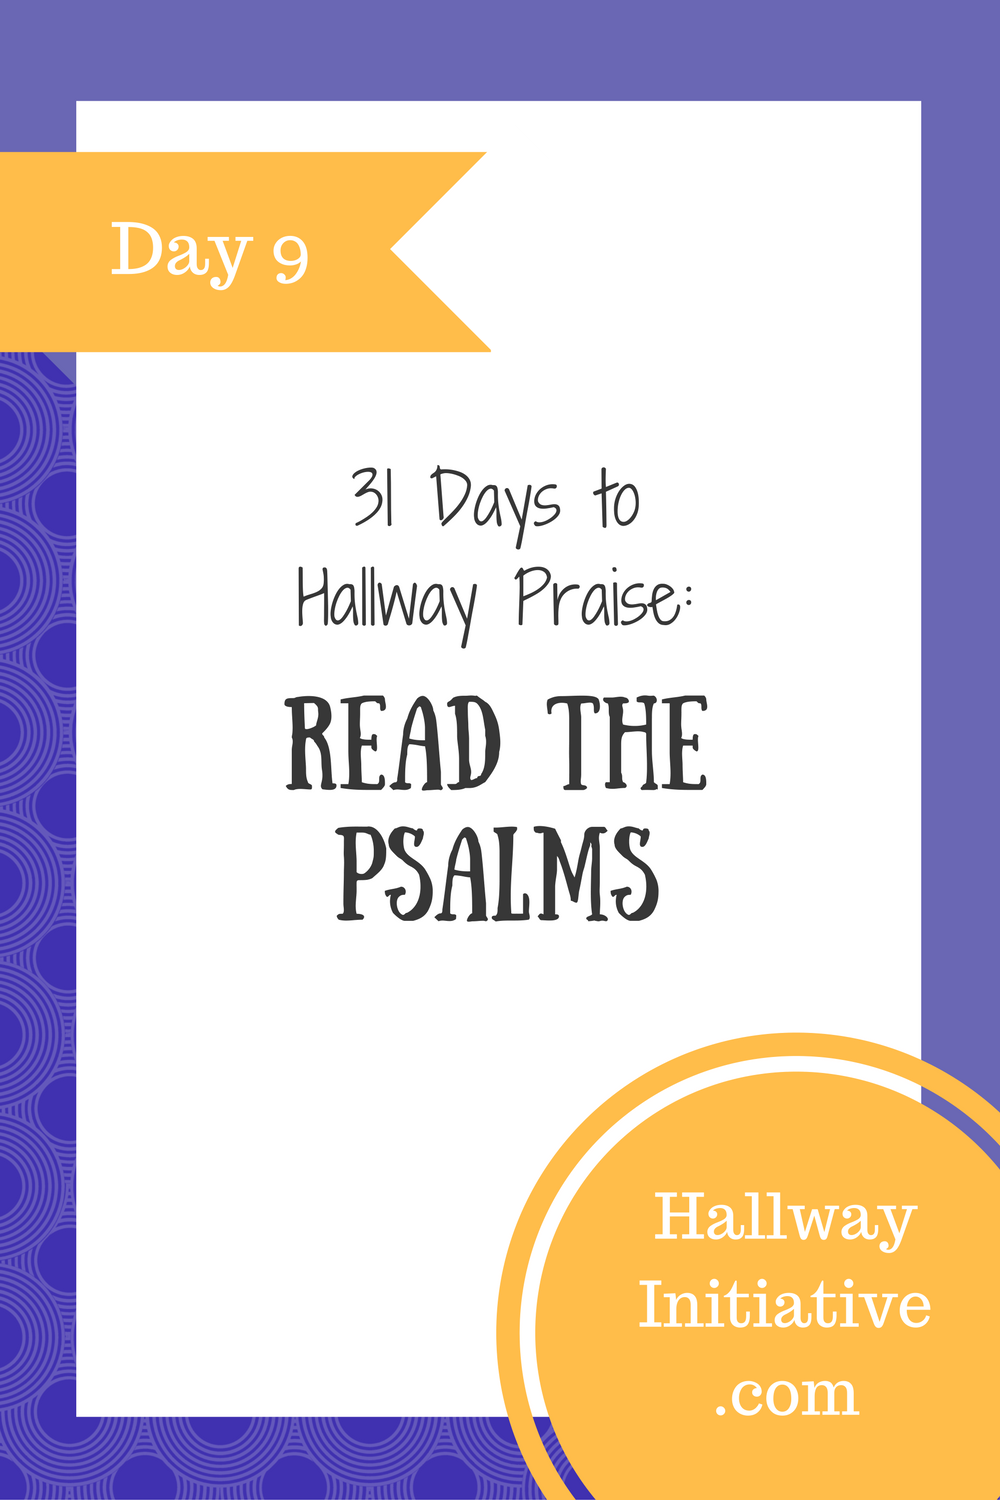 Day 9: read the Psalms